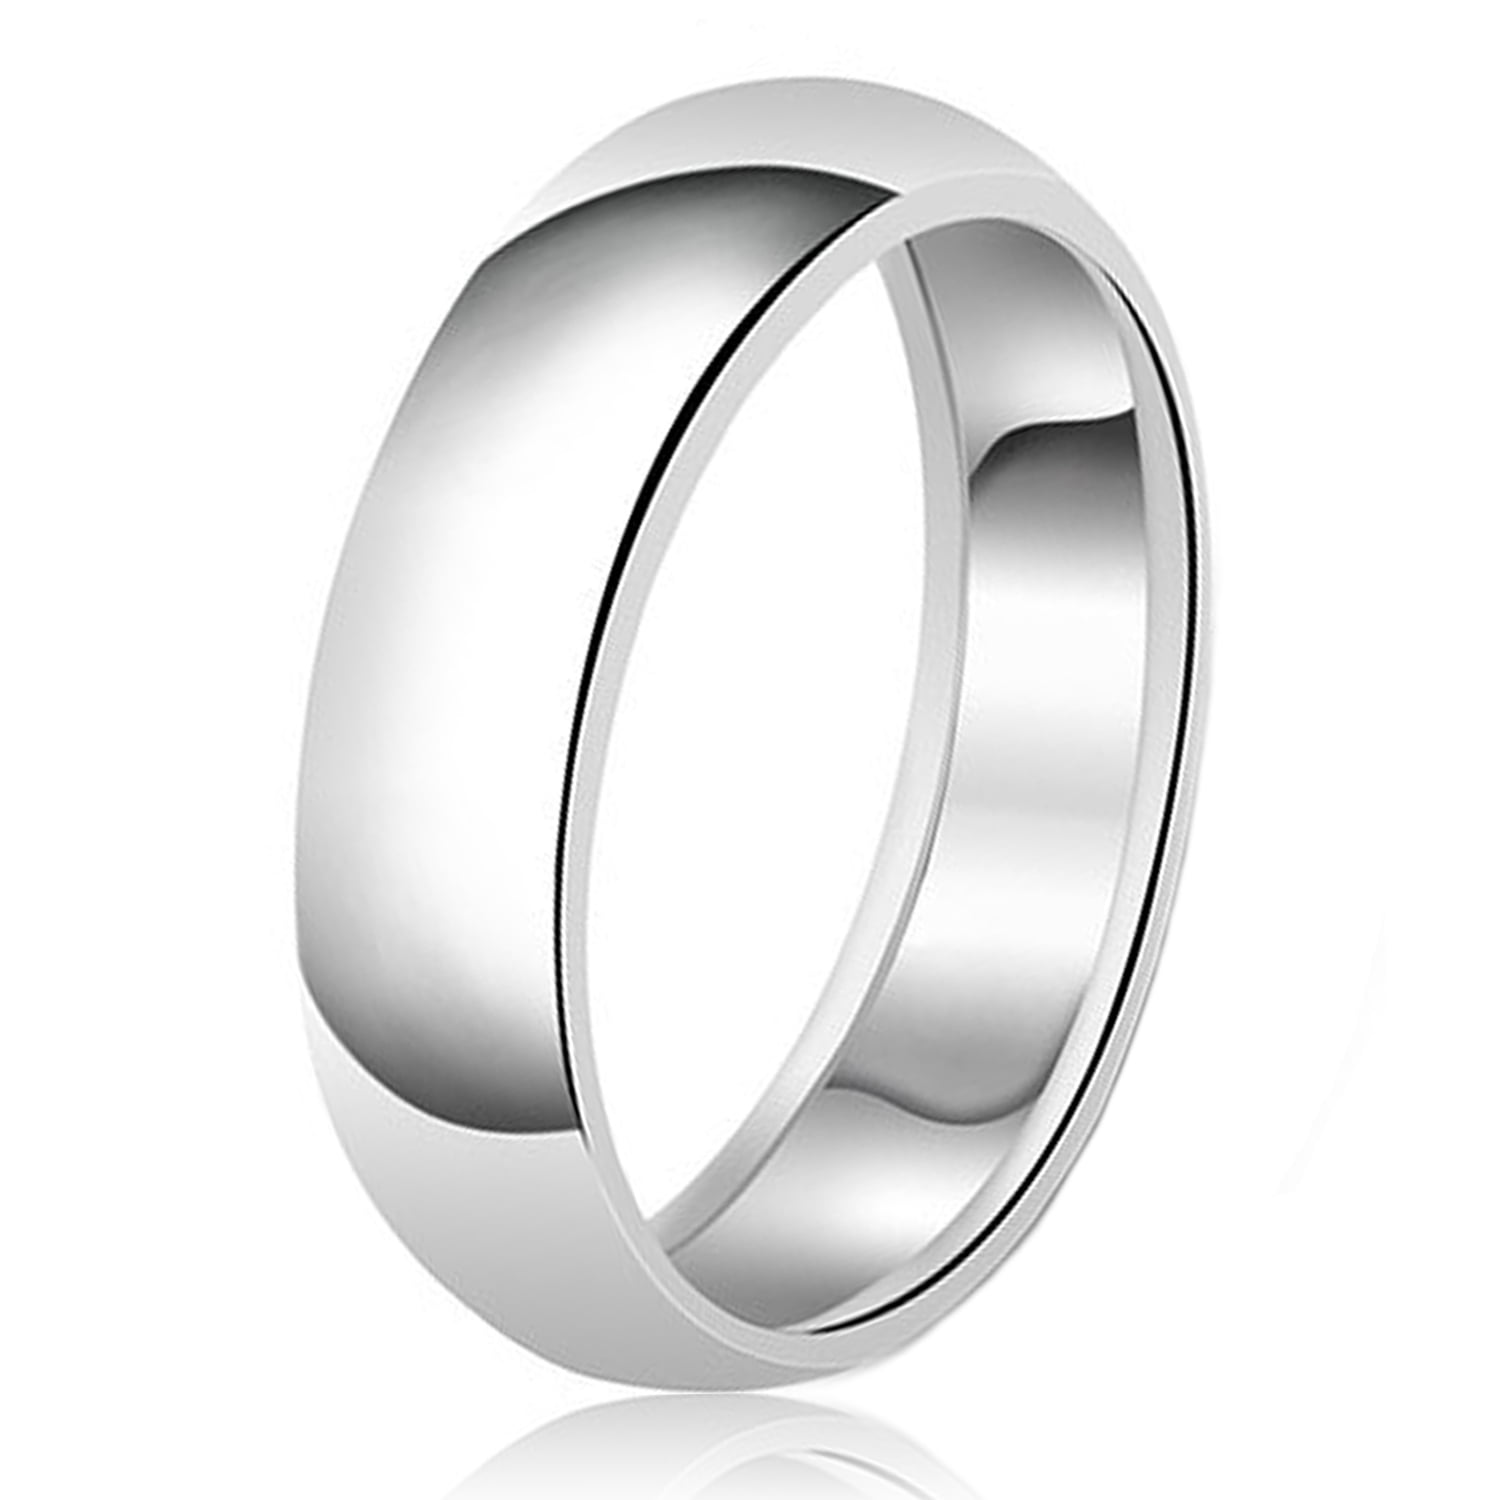 New 925 Sterling Silver Polished 2 Layers 8mm Plain Band Wedding Ring Jewelry 